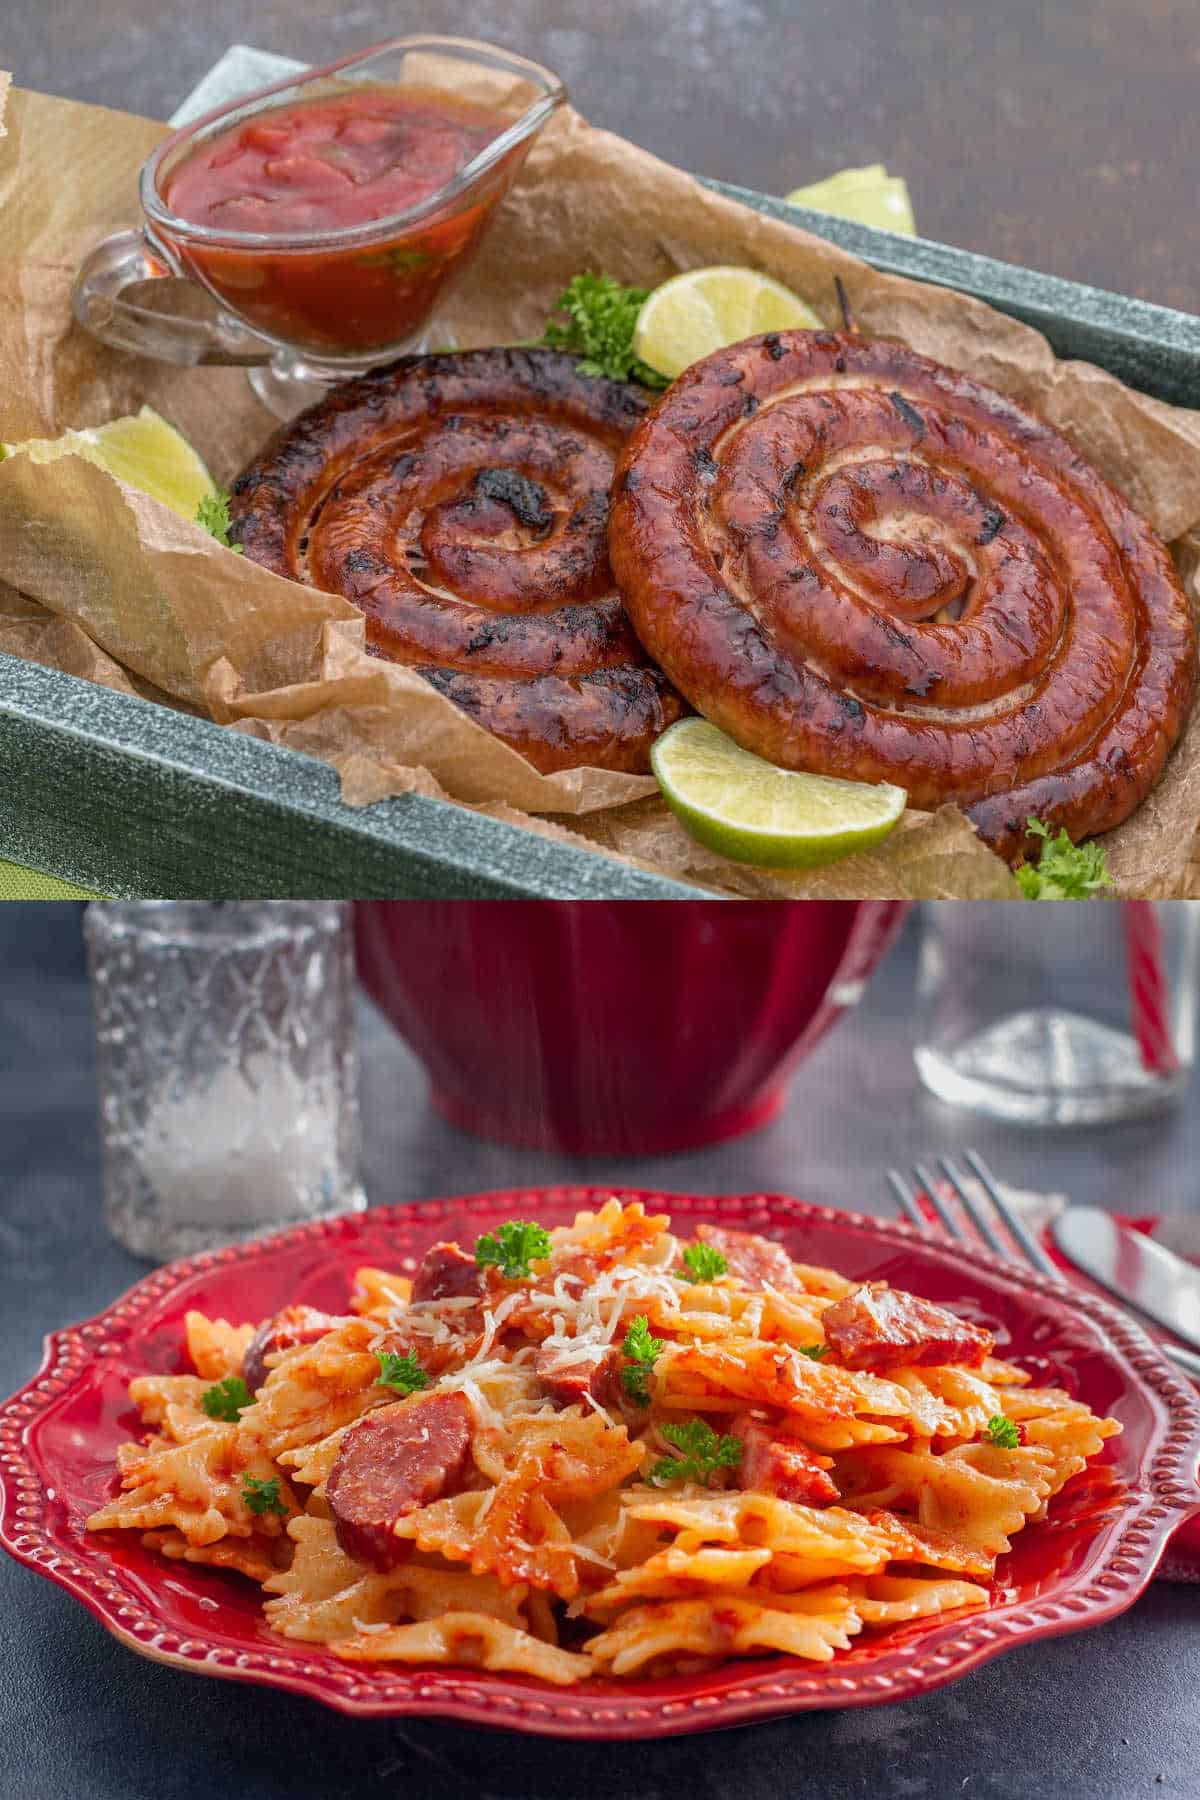 Two images showing smoked sausage cooked in different ways.